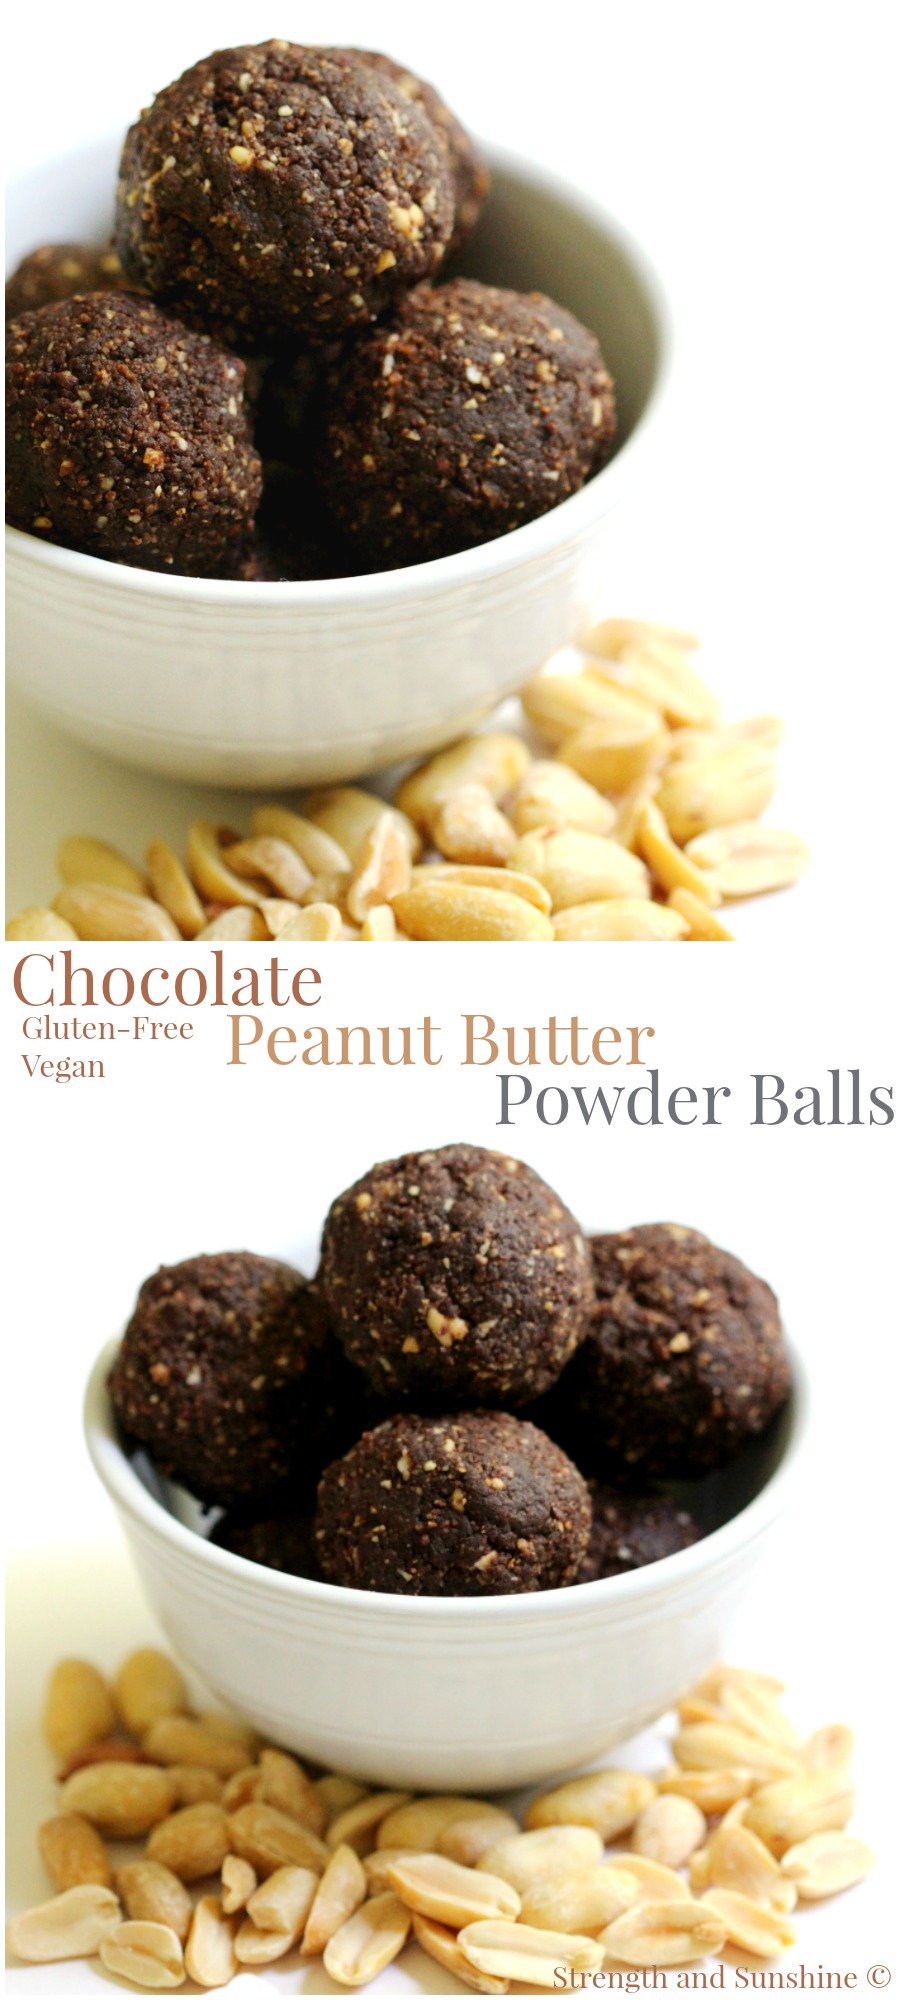 Chocolate Peanut Butter Power Balls | Strength and Sunshine @RebeccaGF666 Get your chocolate and peanut butter fix with these healthy, gluten-free, vegan, and grain-free Chocolate Peanut Butter Power Balls! A yummy protein-packed snack recipe for all ages and bite sizes!